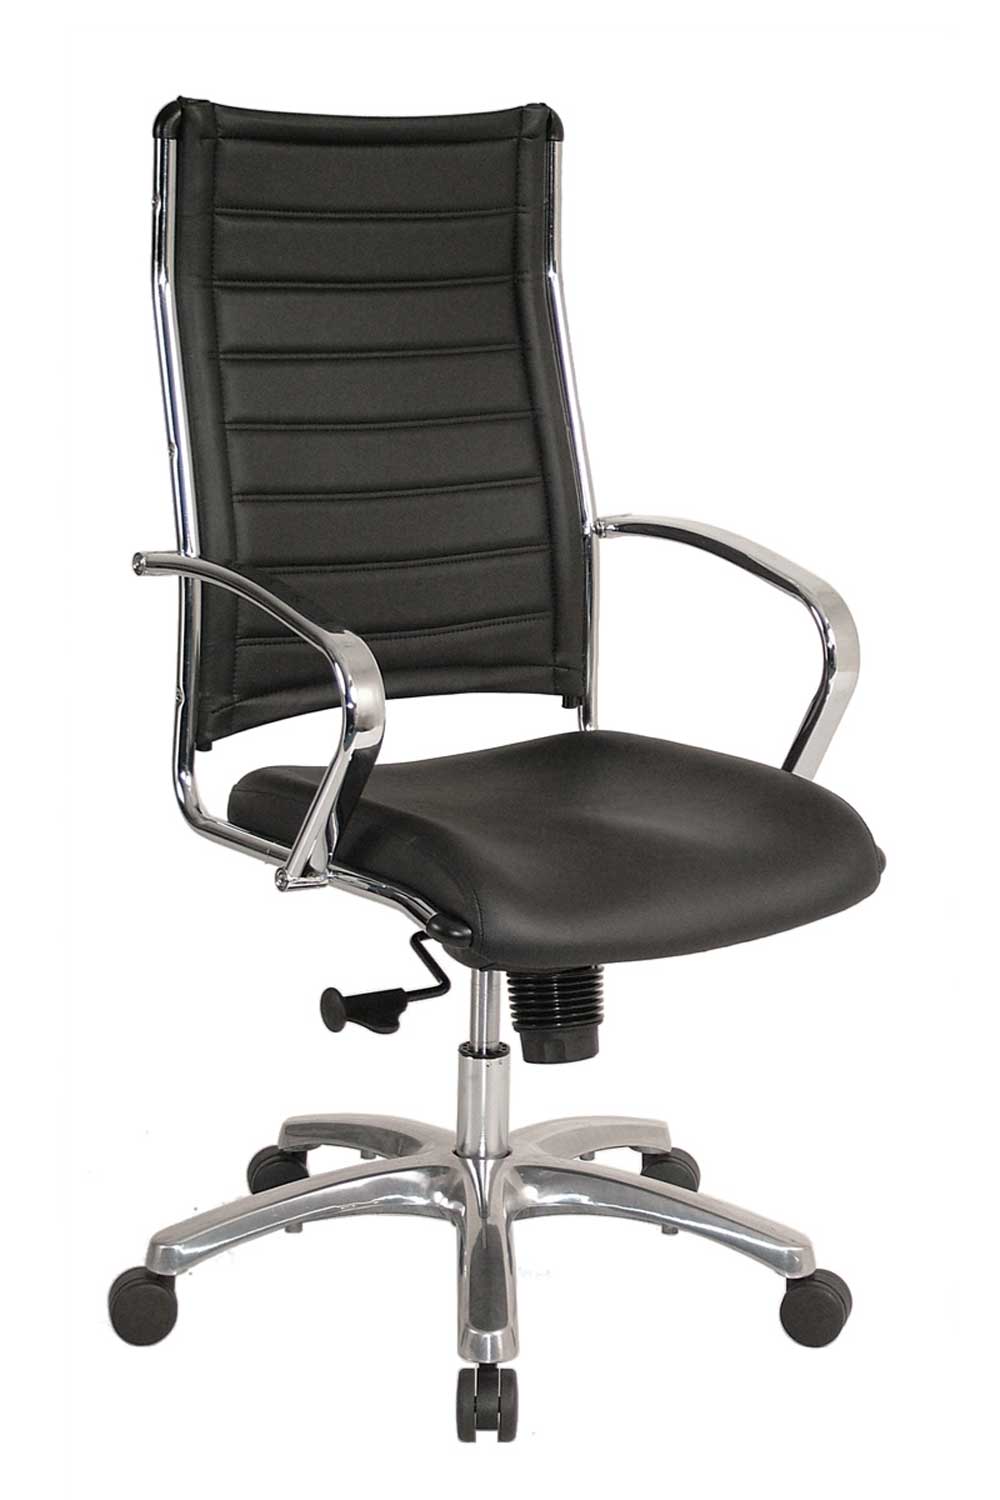 Vinyl Office Chairs As Leather Chair Alternative